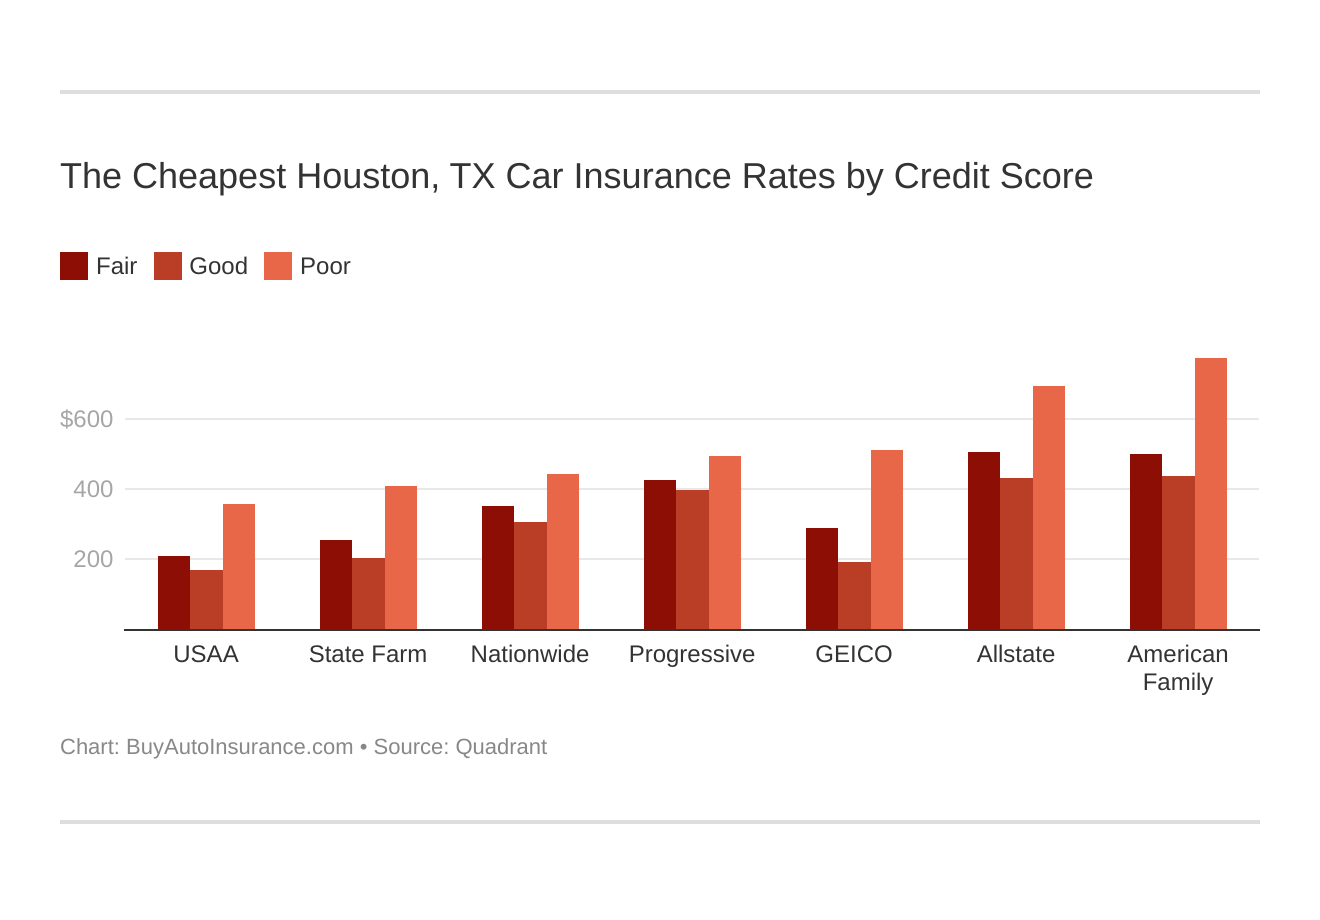 The Cheapest Houston, TX Car Insurance Rates by Credit Score